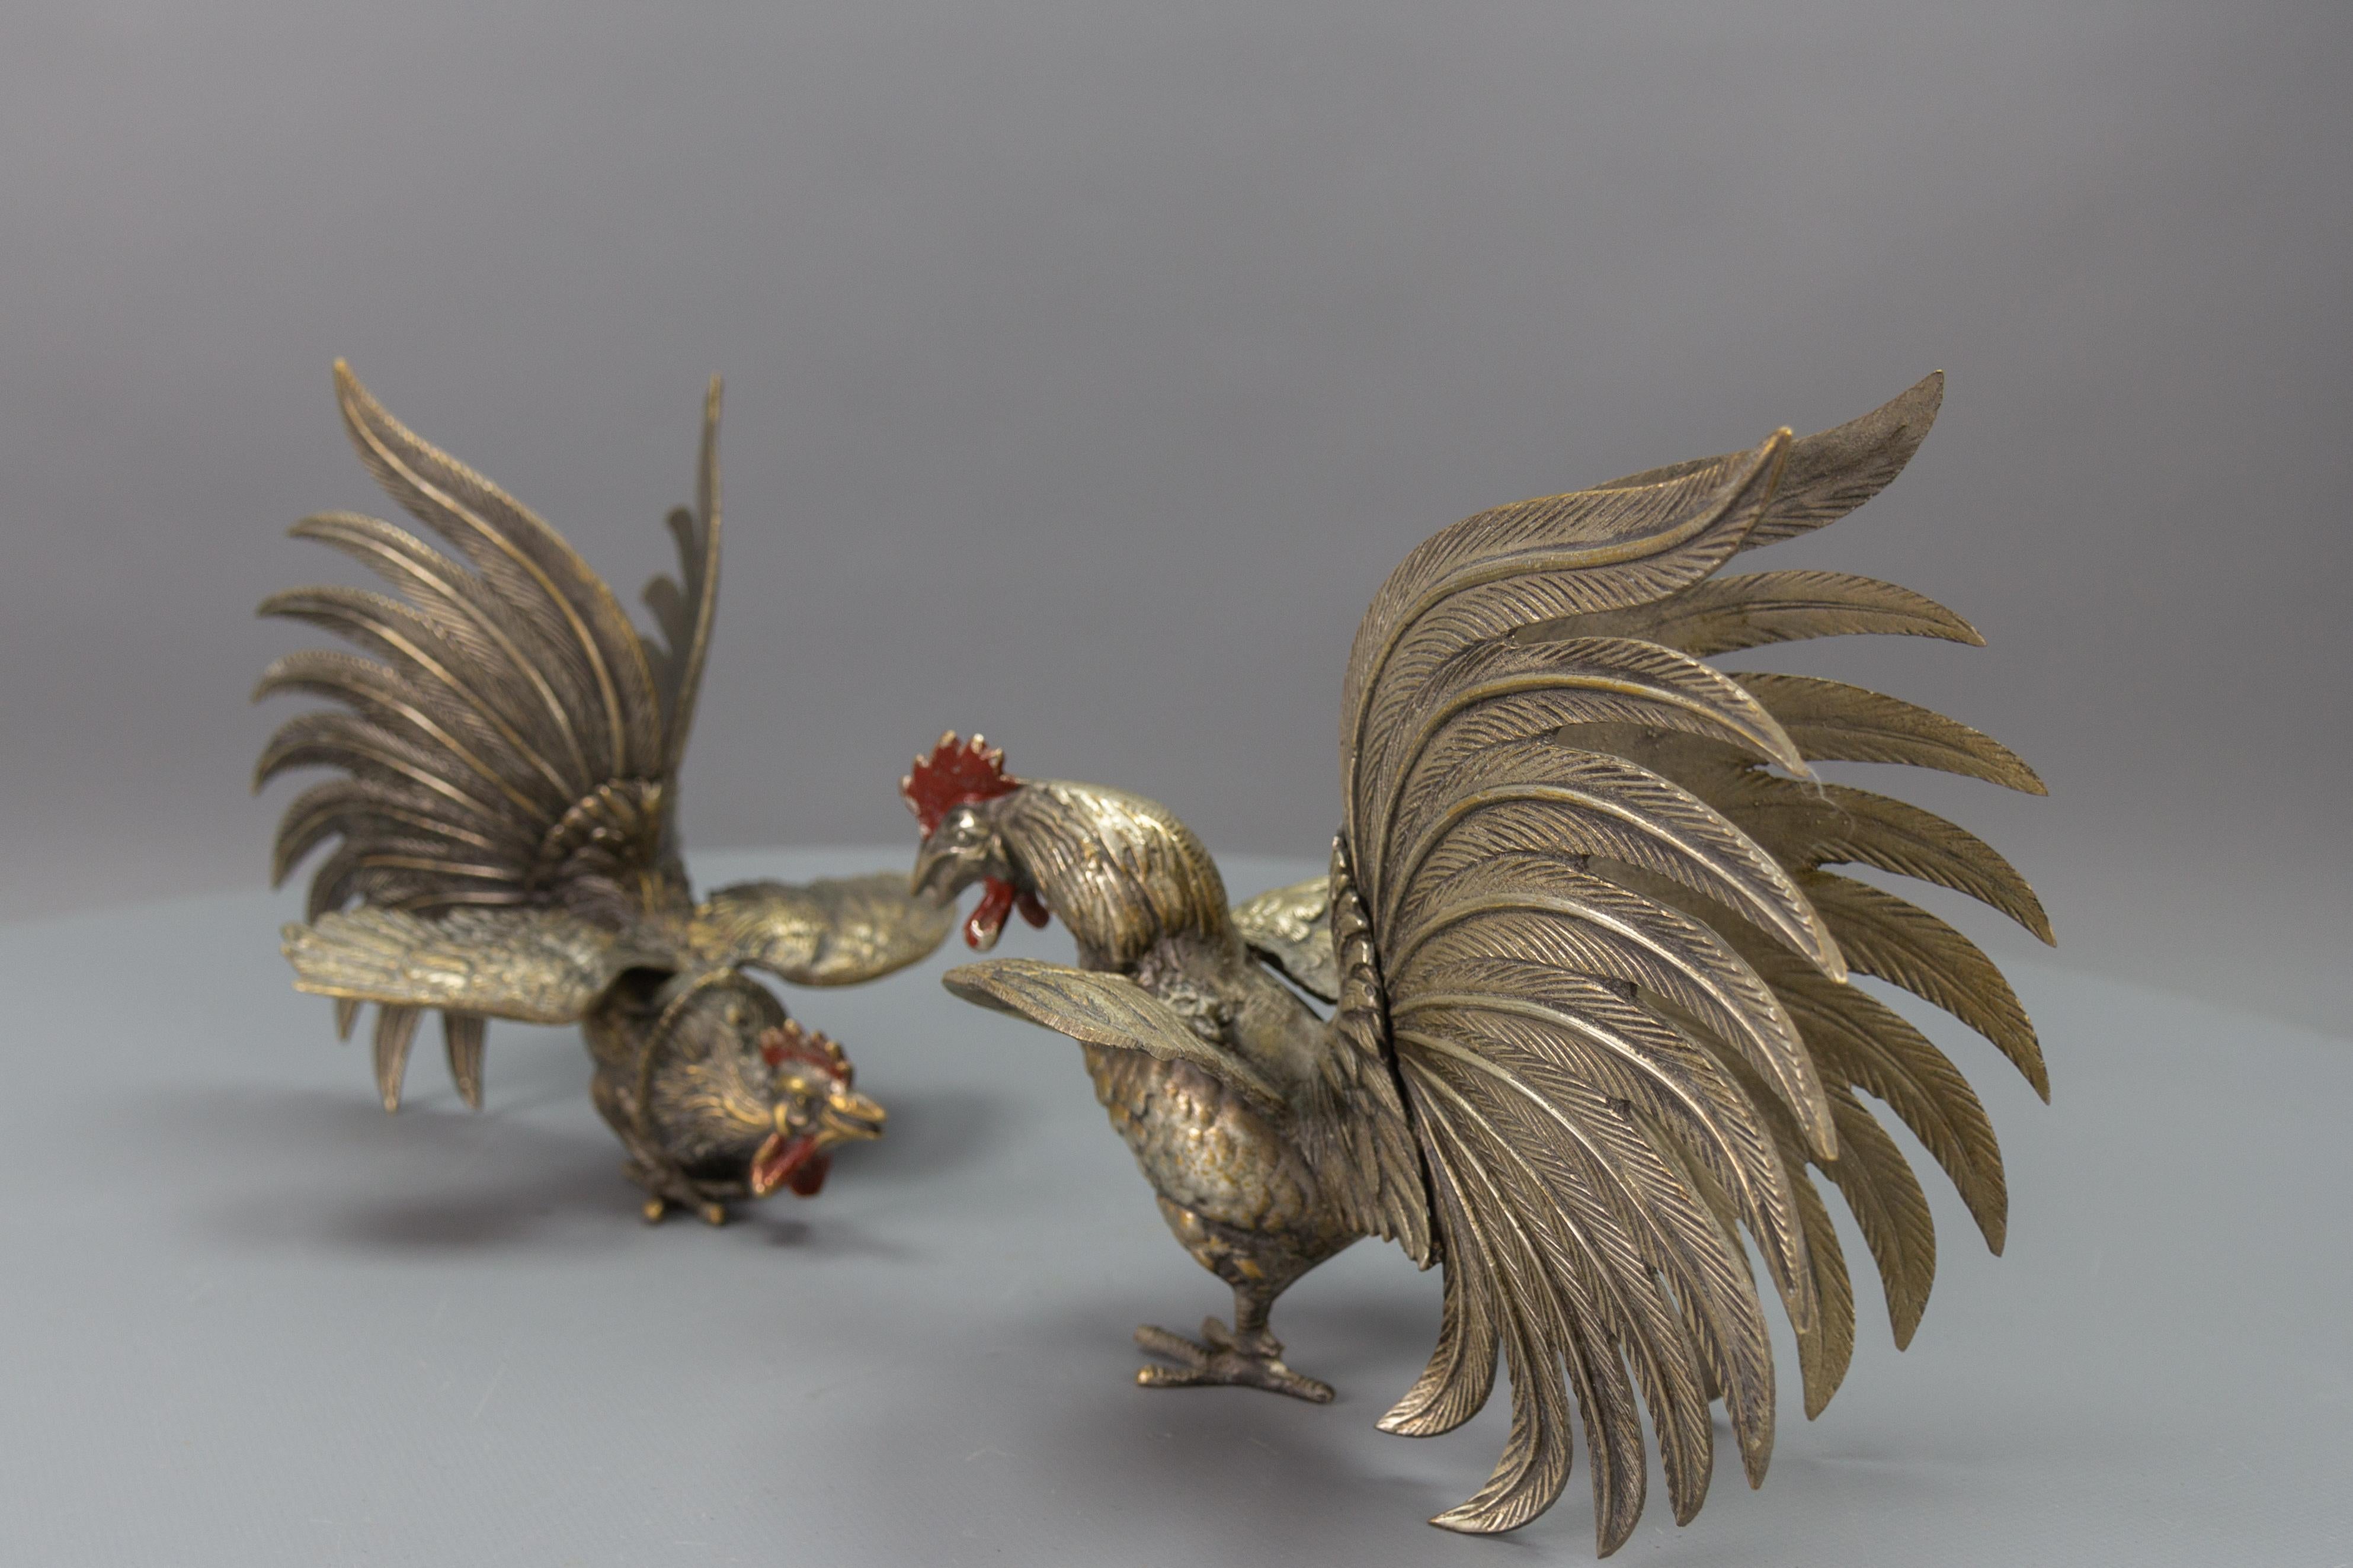 Pair of Bronze Sculptures of Fighting Roosters, Japan, circa the 1950s
A pair of beautifully and lifelike sculpted bronze roosters with red-painted rooster combs and wattles. These impressive bird sculptures depict a fight between two roosters.
In